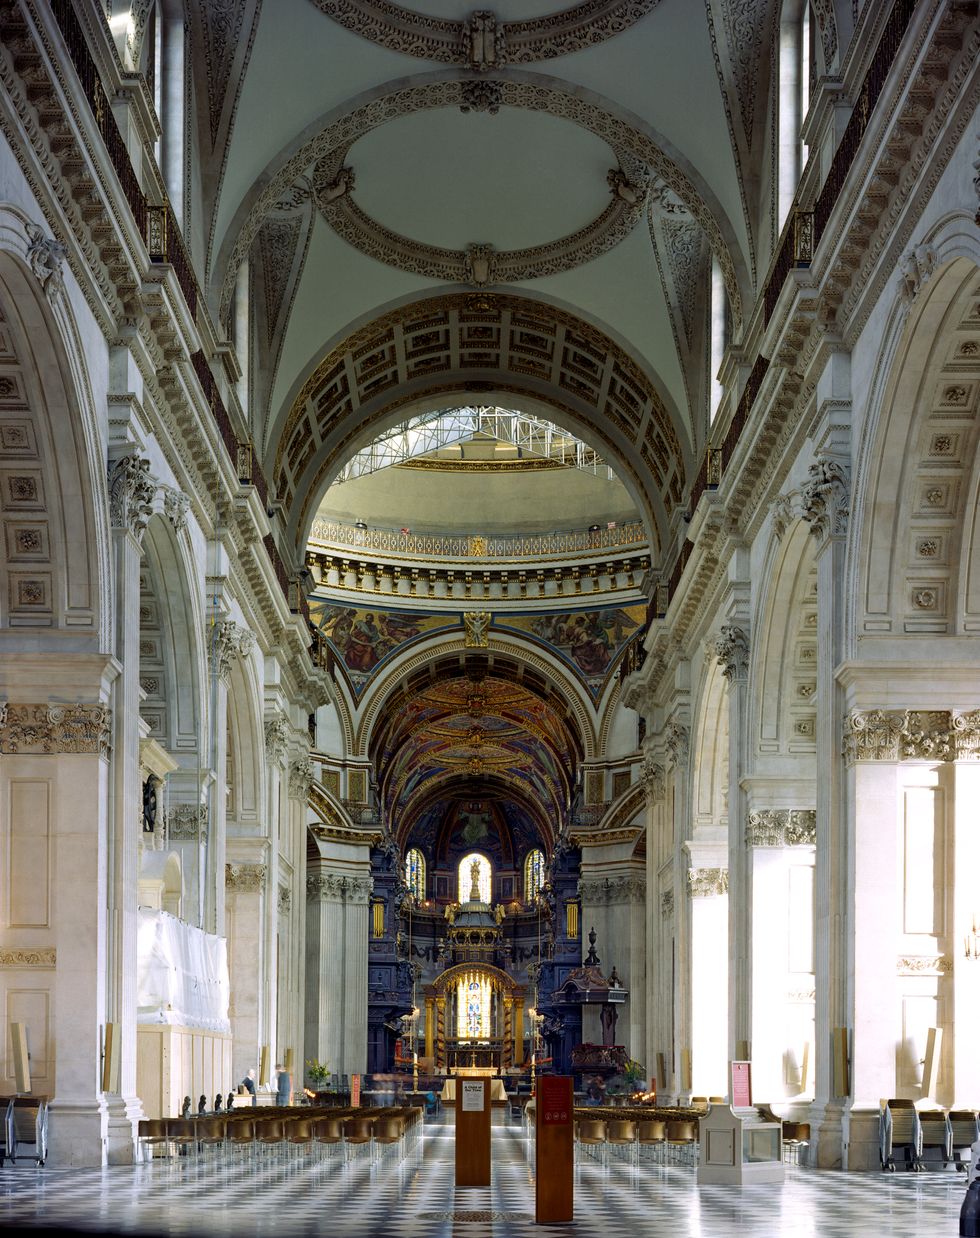 st paul's cathedral, london, uk the cleaning program celebrated the 300th anniversary of sir christopher wren's masterpiece